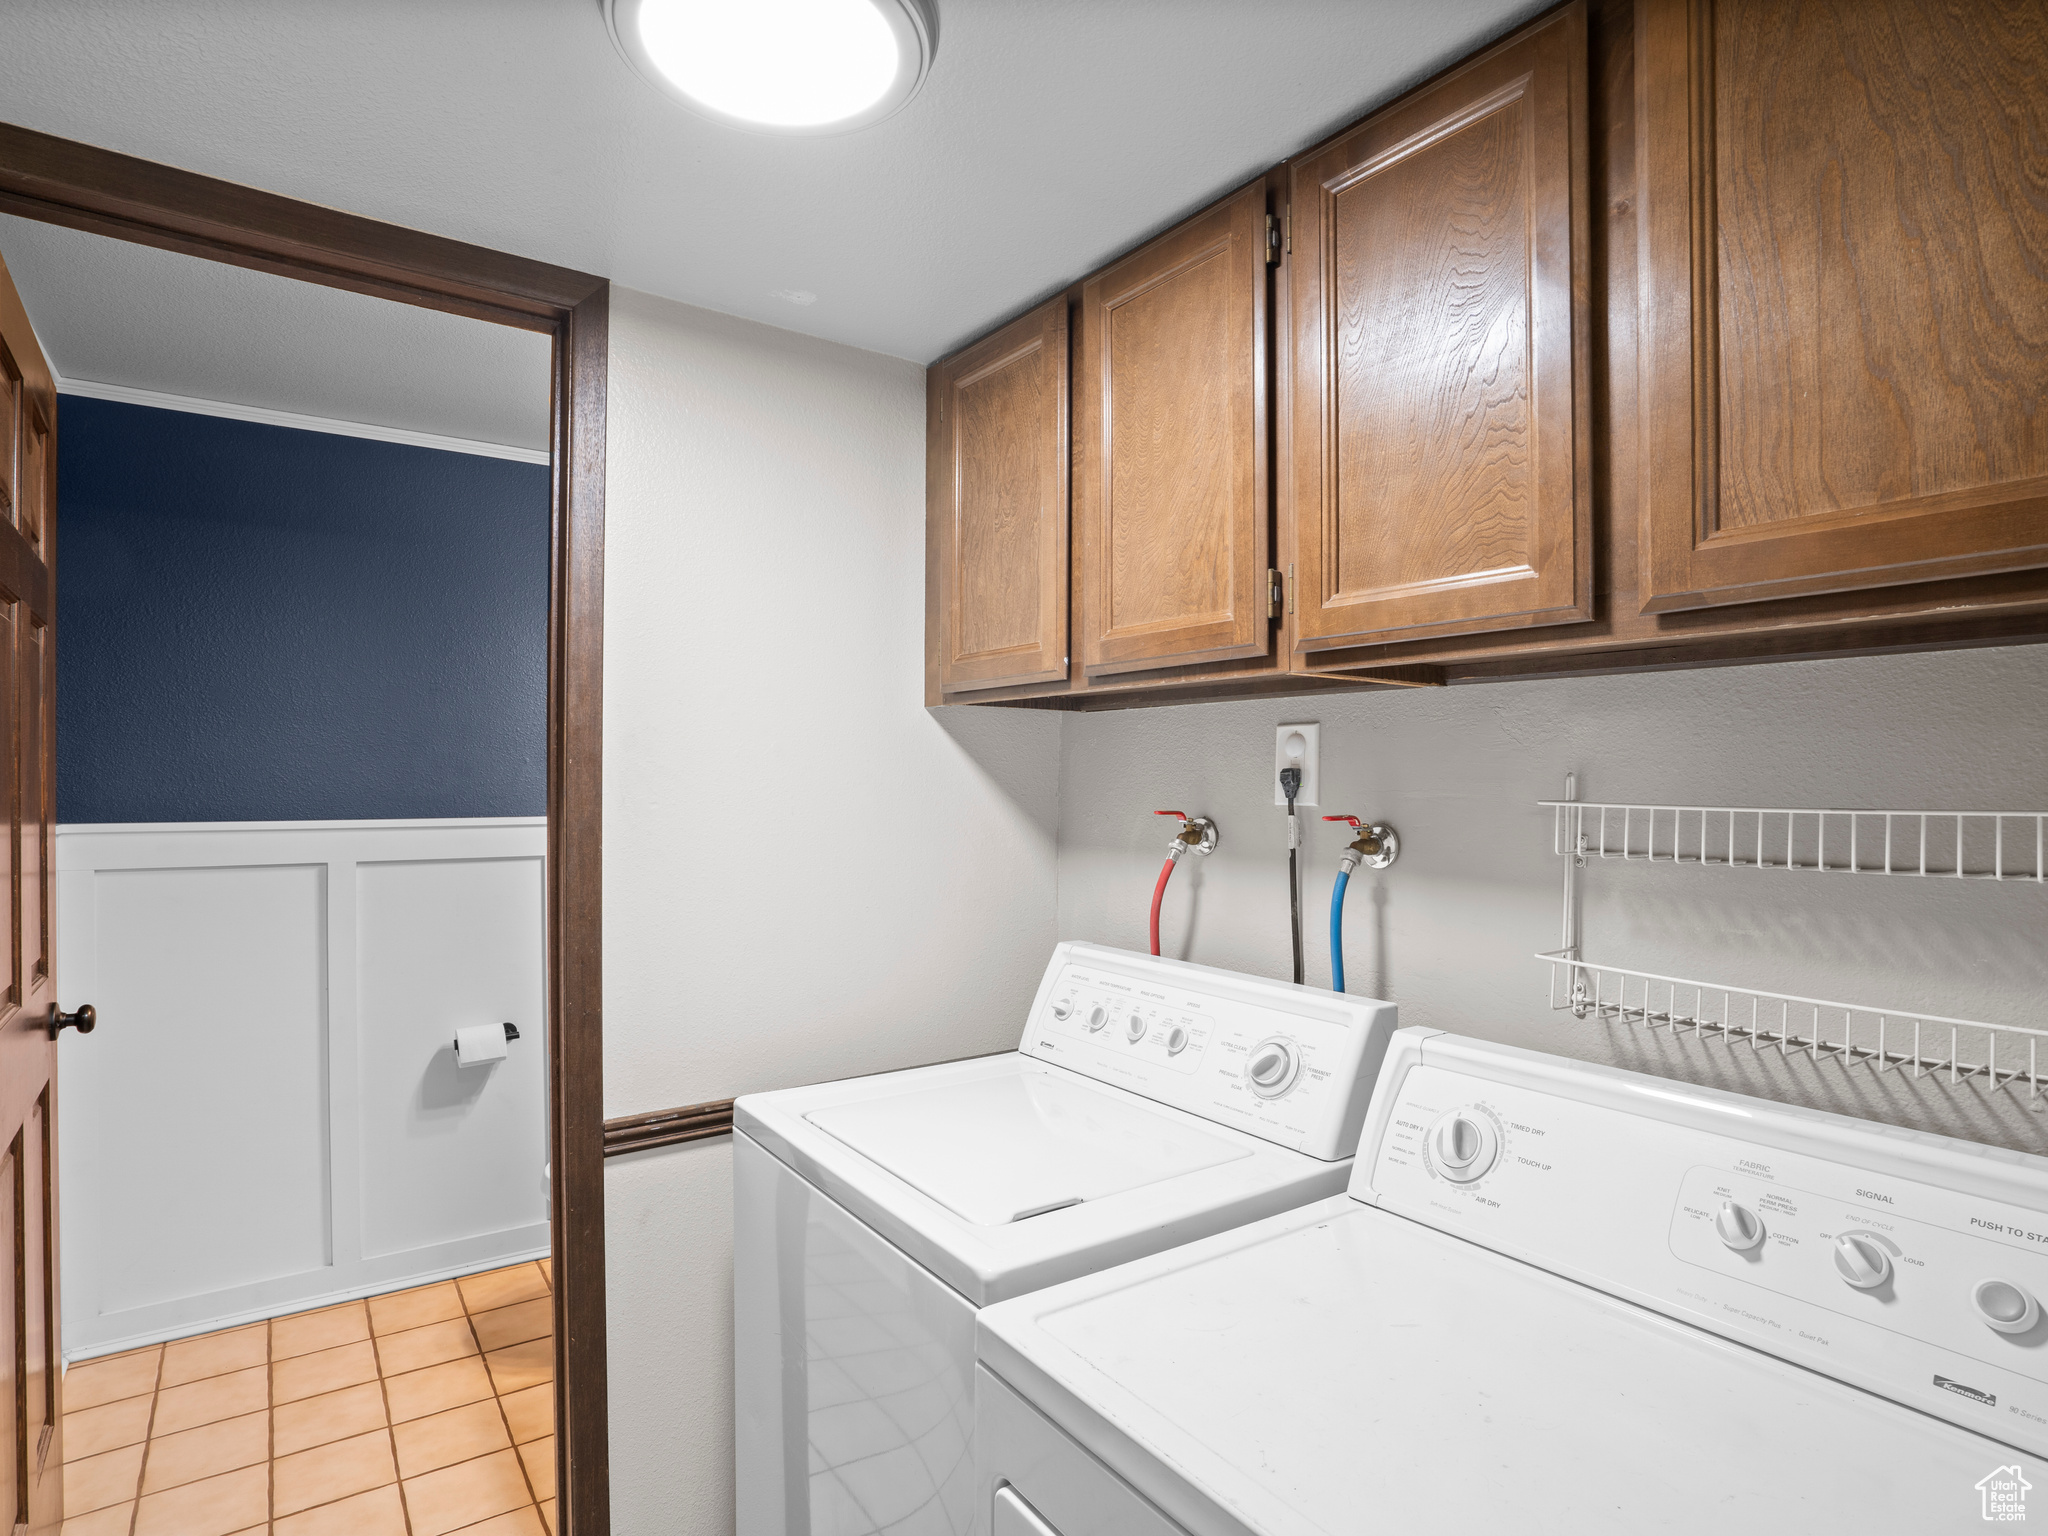 Laundry room featuring cabinets, light tile floors, hookup for a washing machine, and washer and clothes dryer